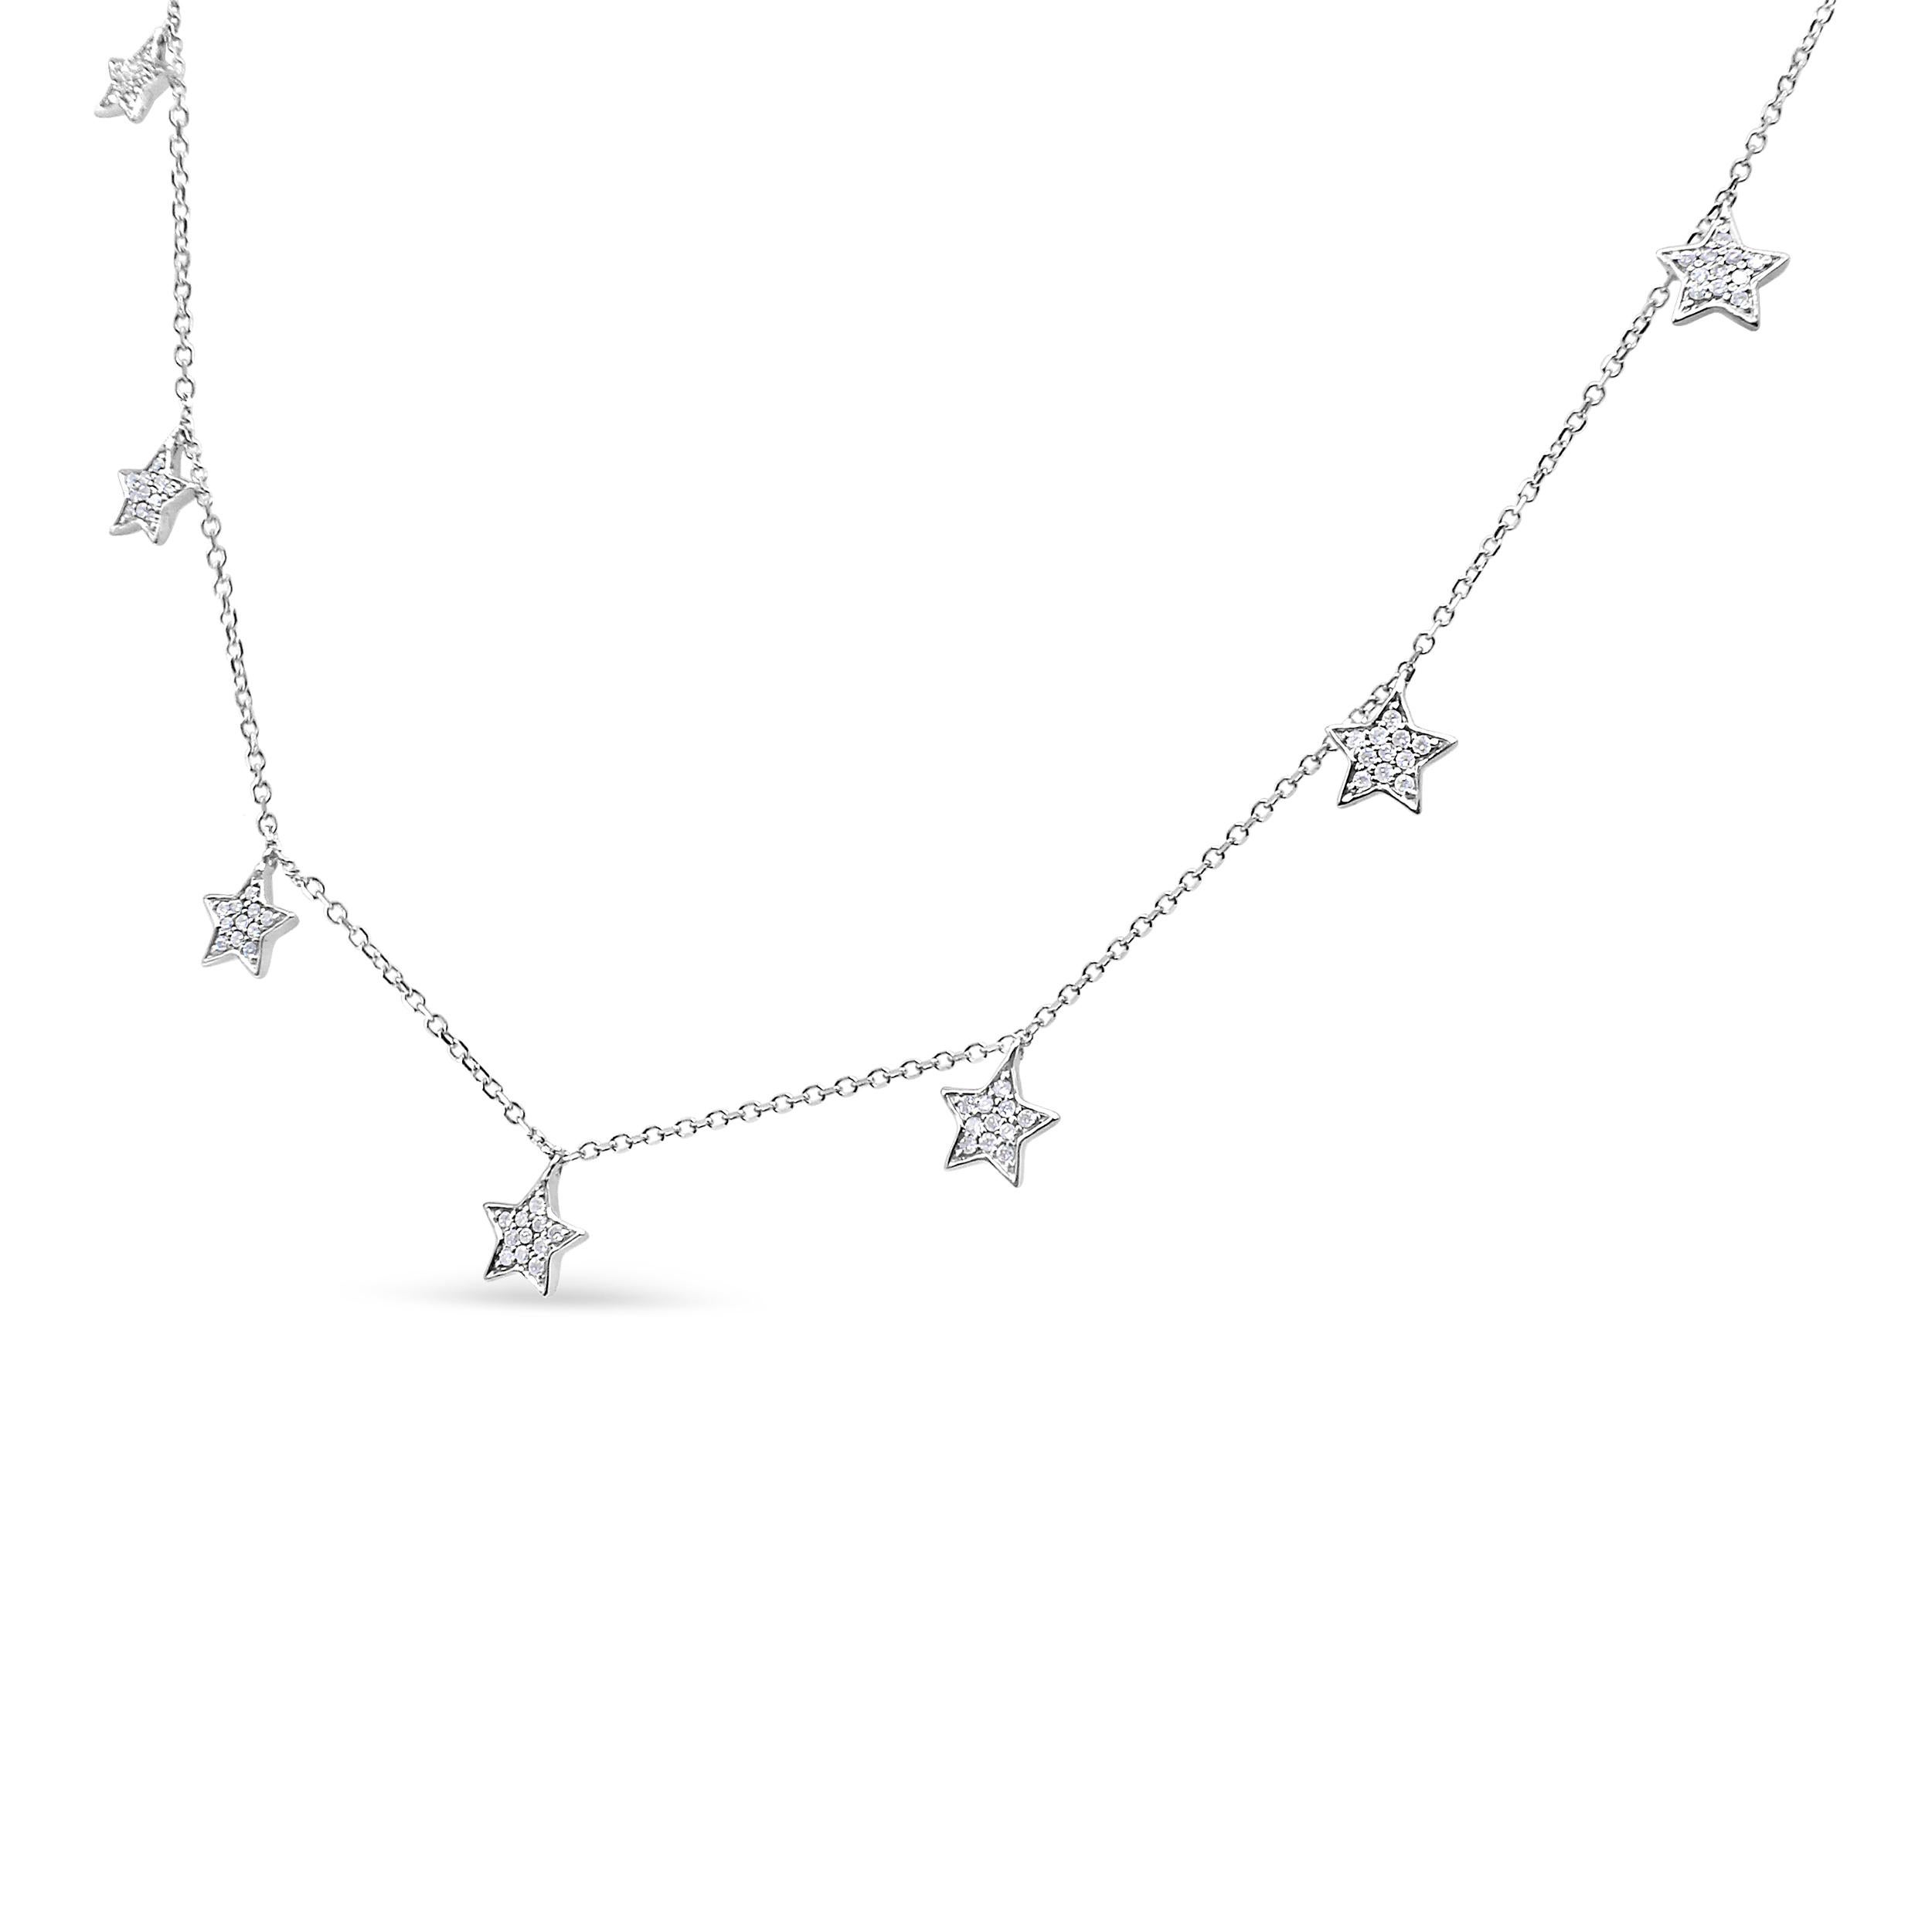 Set your sights to the sky with this heavenly multi-star dangle droplet pendant necklace. This celestial pendant necklace is adorned with multiple star silhouettes, each set with clusters of glimmering prong-set diamonds for a total 1/3 cttw of an